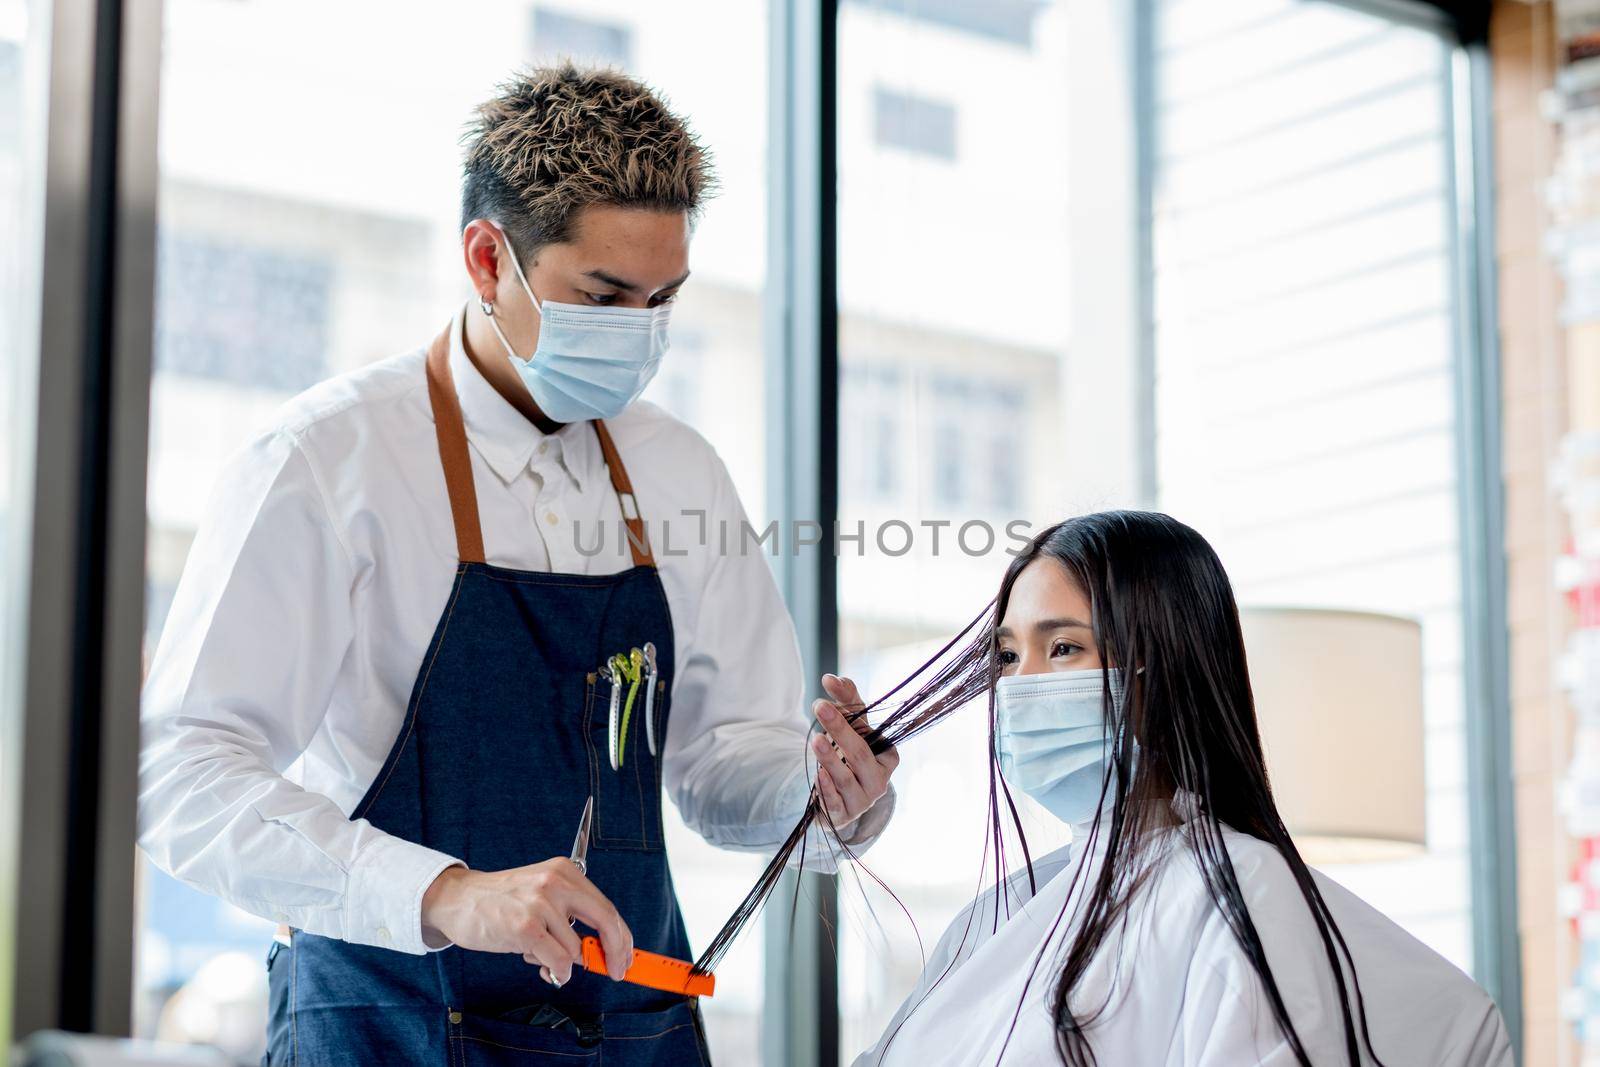 Asian beauty salon barber man with hygiene mask stand and process of hair cut of long hair customer and woman also wear hygiene mask. Concept of beauty business during Covid-19 pandemic. by nrradmin